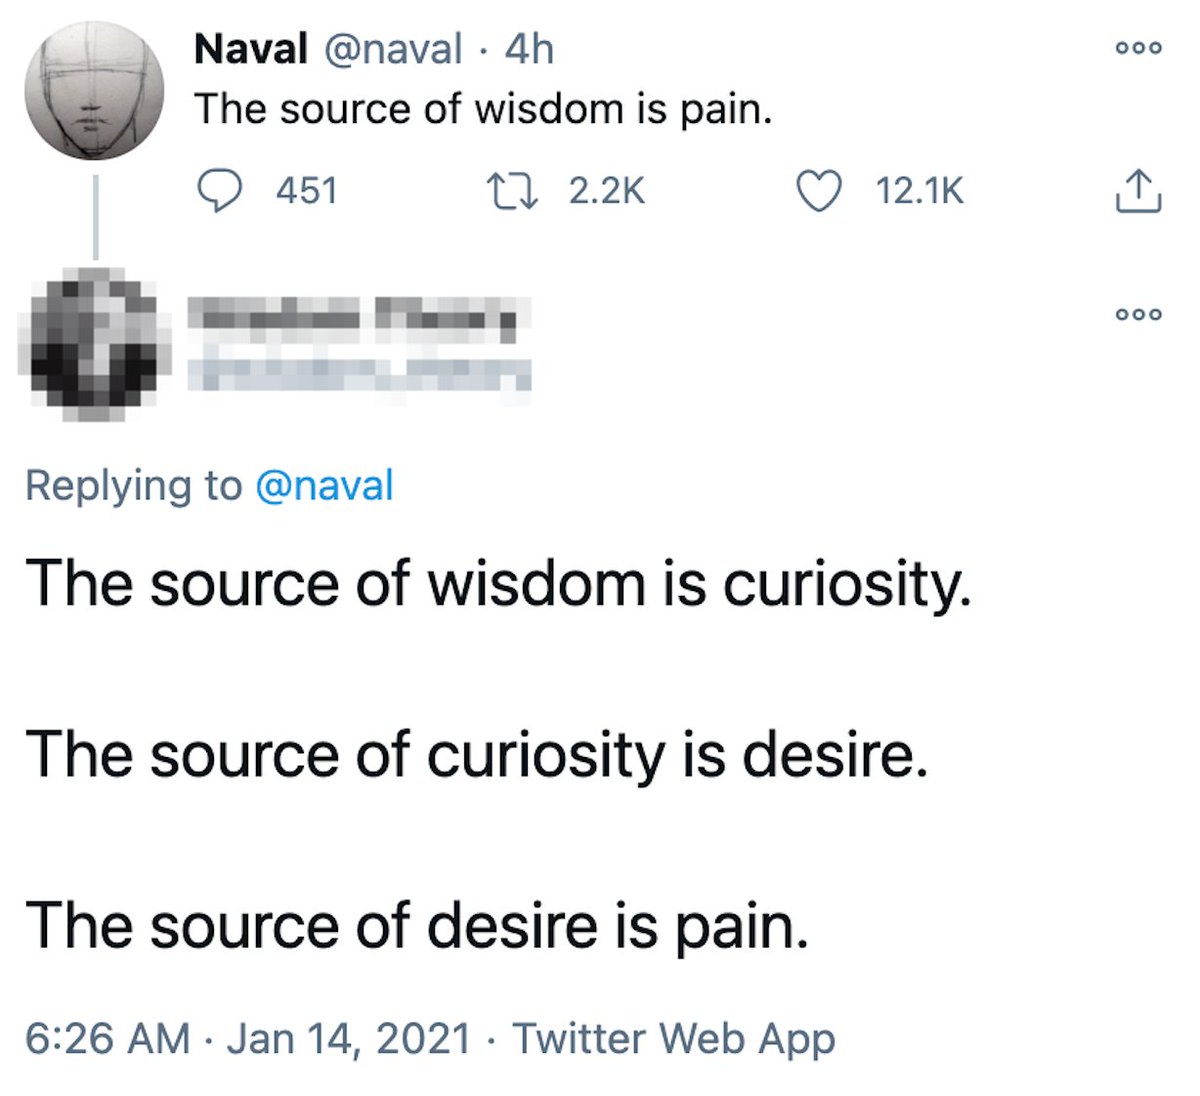 1/ Tweeting fortune cookie replies to fortune cookie tweets.The only thing worse than fortune cookie tweets are the replies.Each reply competes to sound wiser, creating a self-replicating strain of bro wisdom that extends far beyond the outer edges of acceptable behavior.